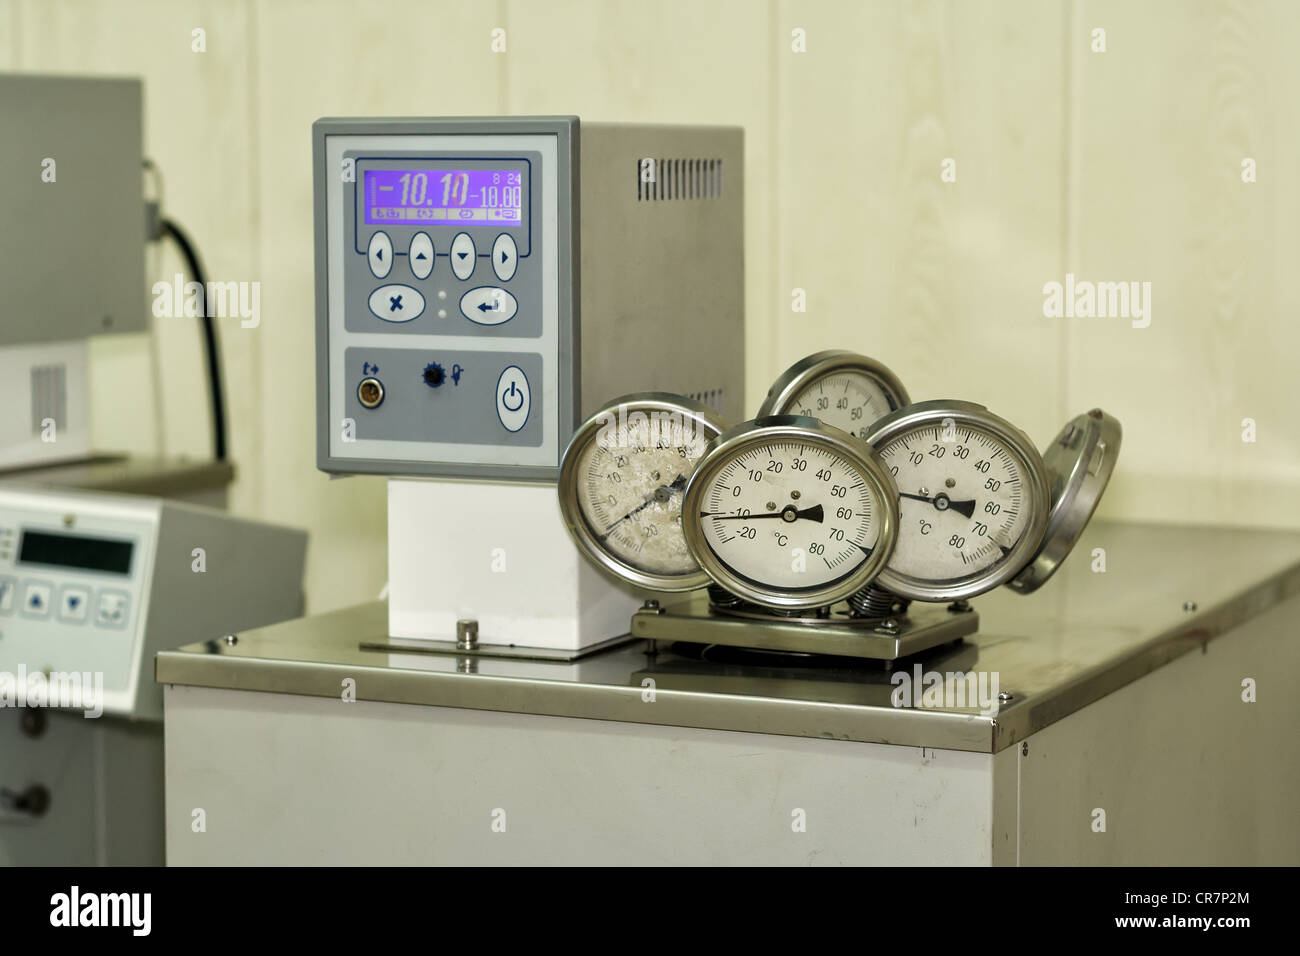 test, technology, sample, research, professional, metal, laboratory, lab, industry, industrial, experiment, equipment, device, a Stock Photo